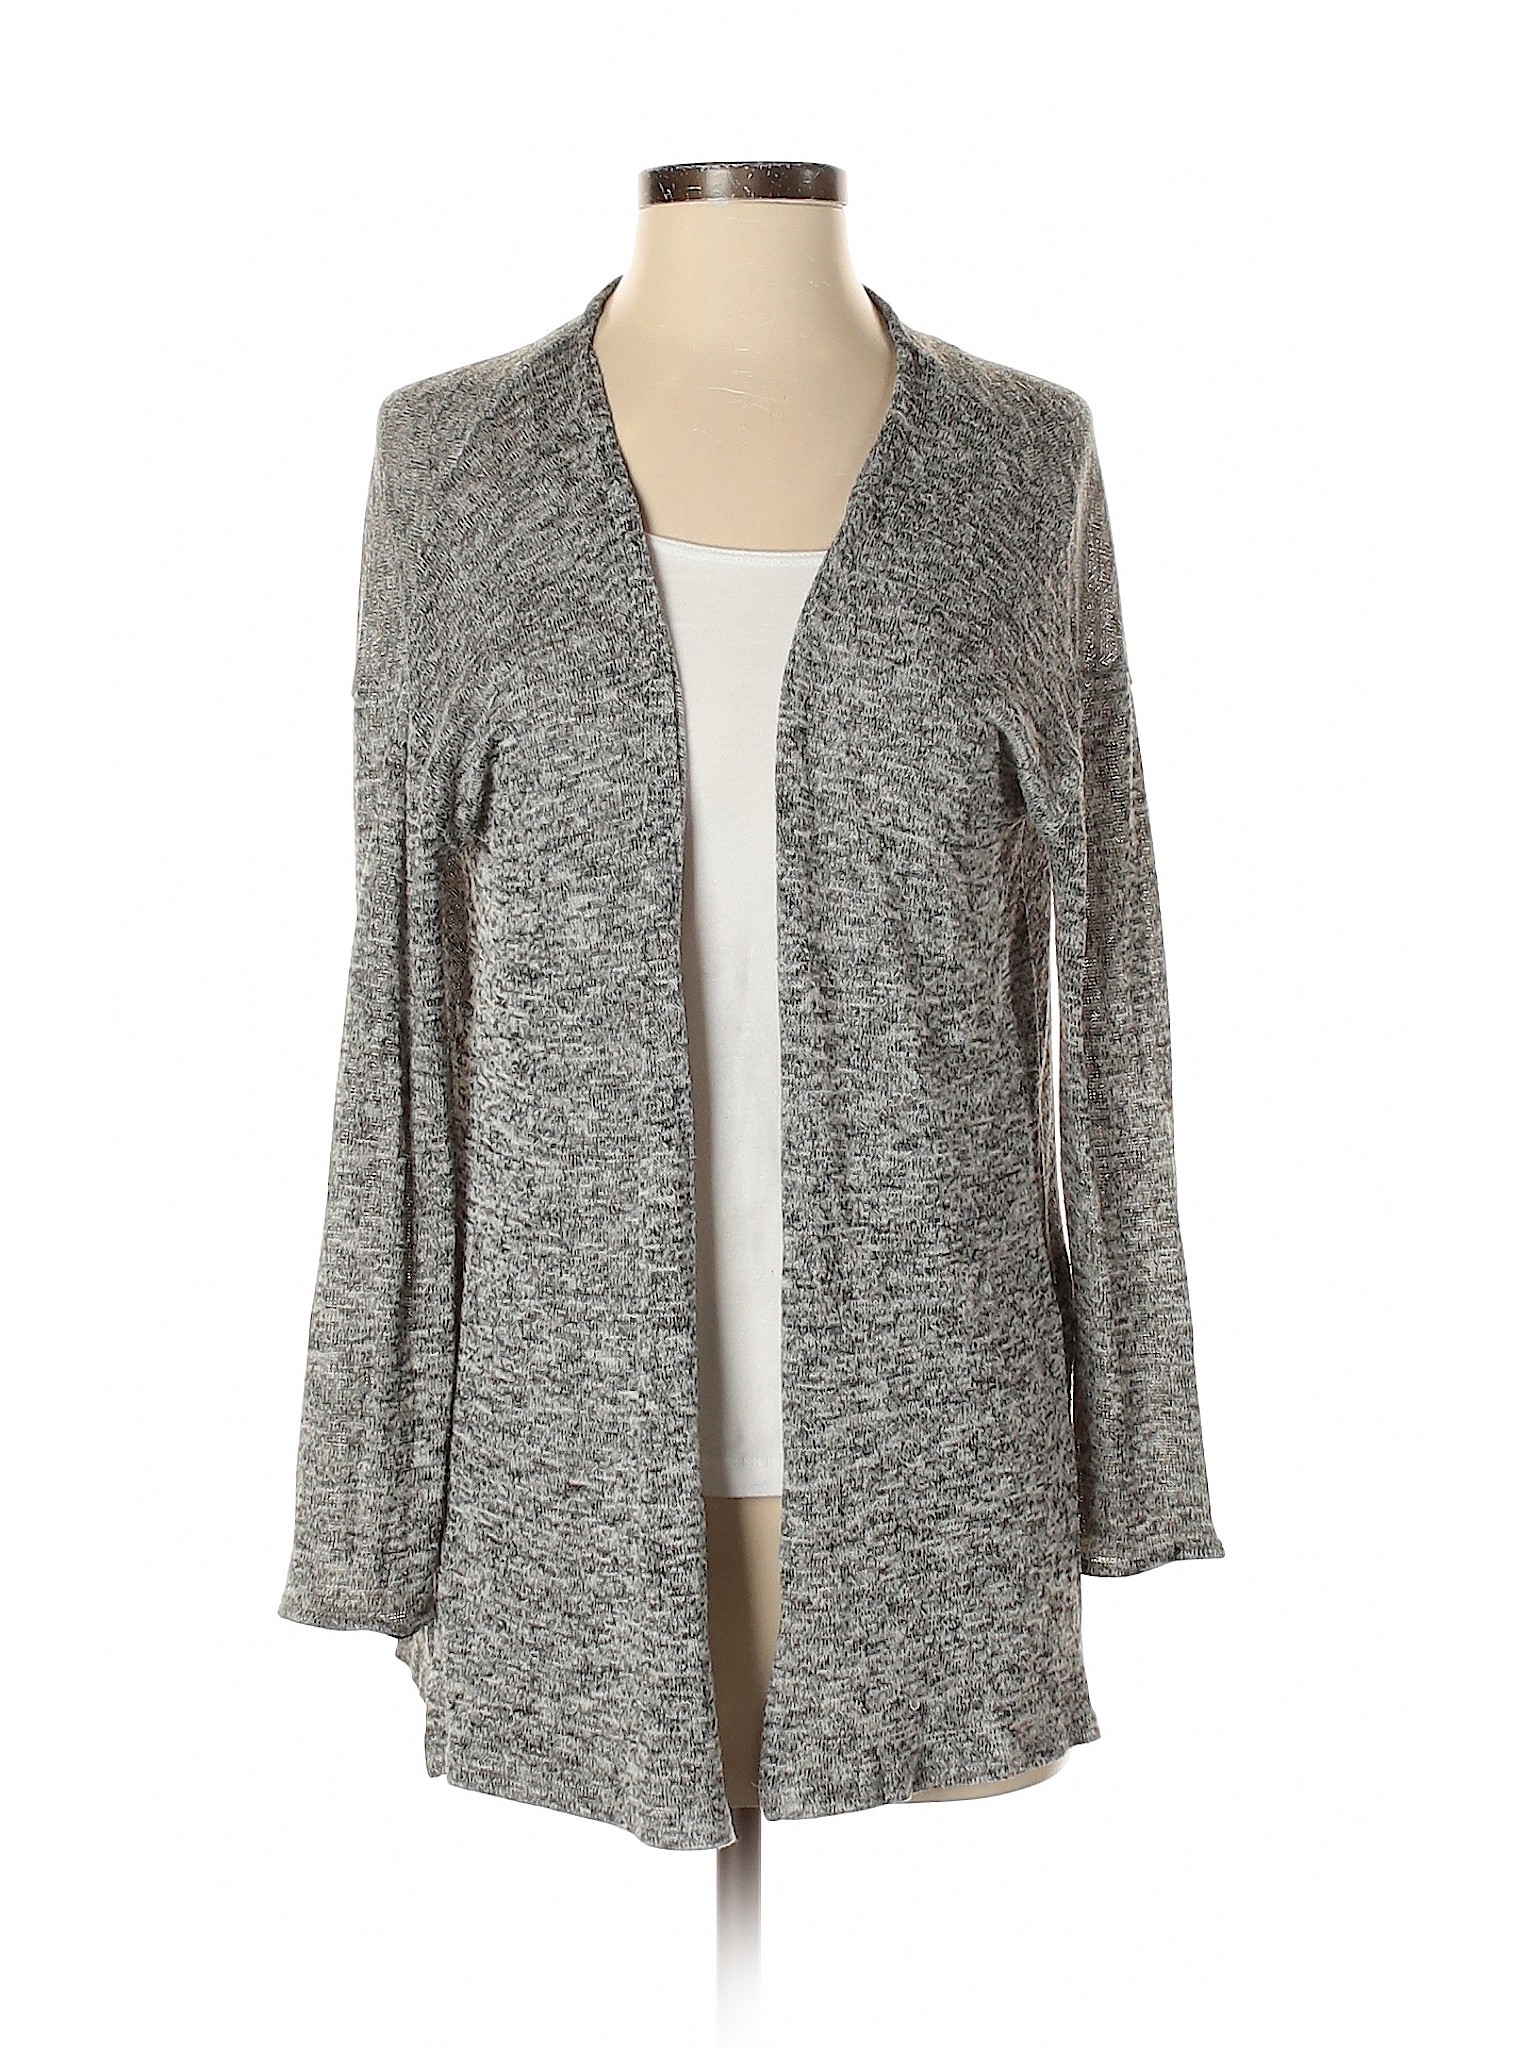 Divided by H&M Women Gray Cardigan XS | eBay